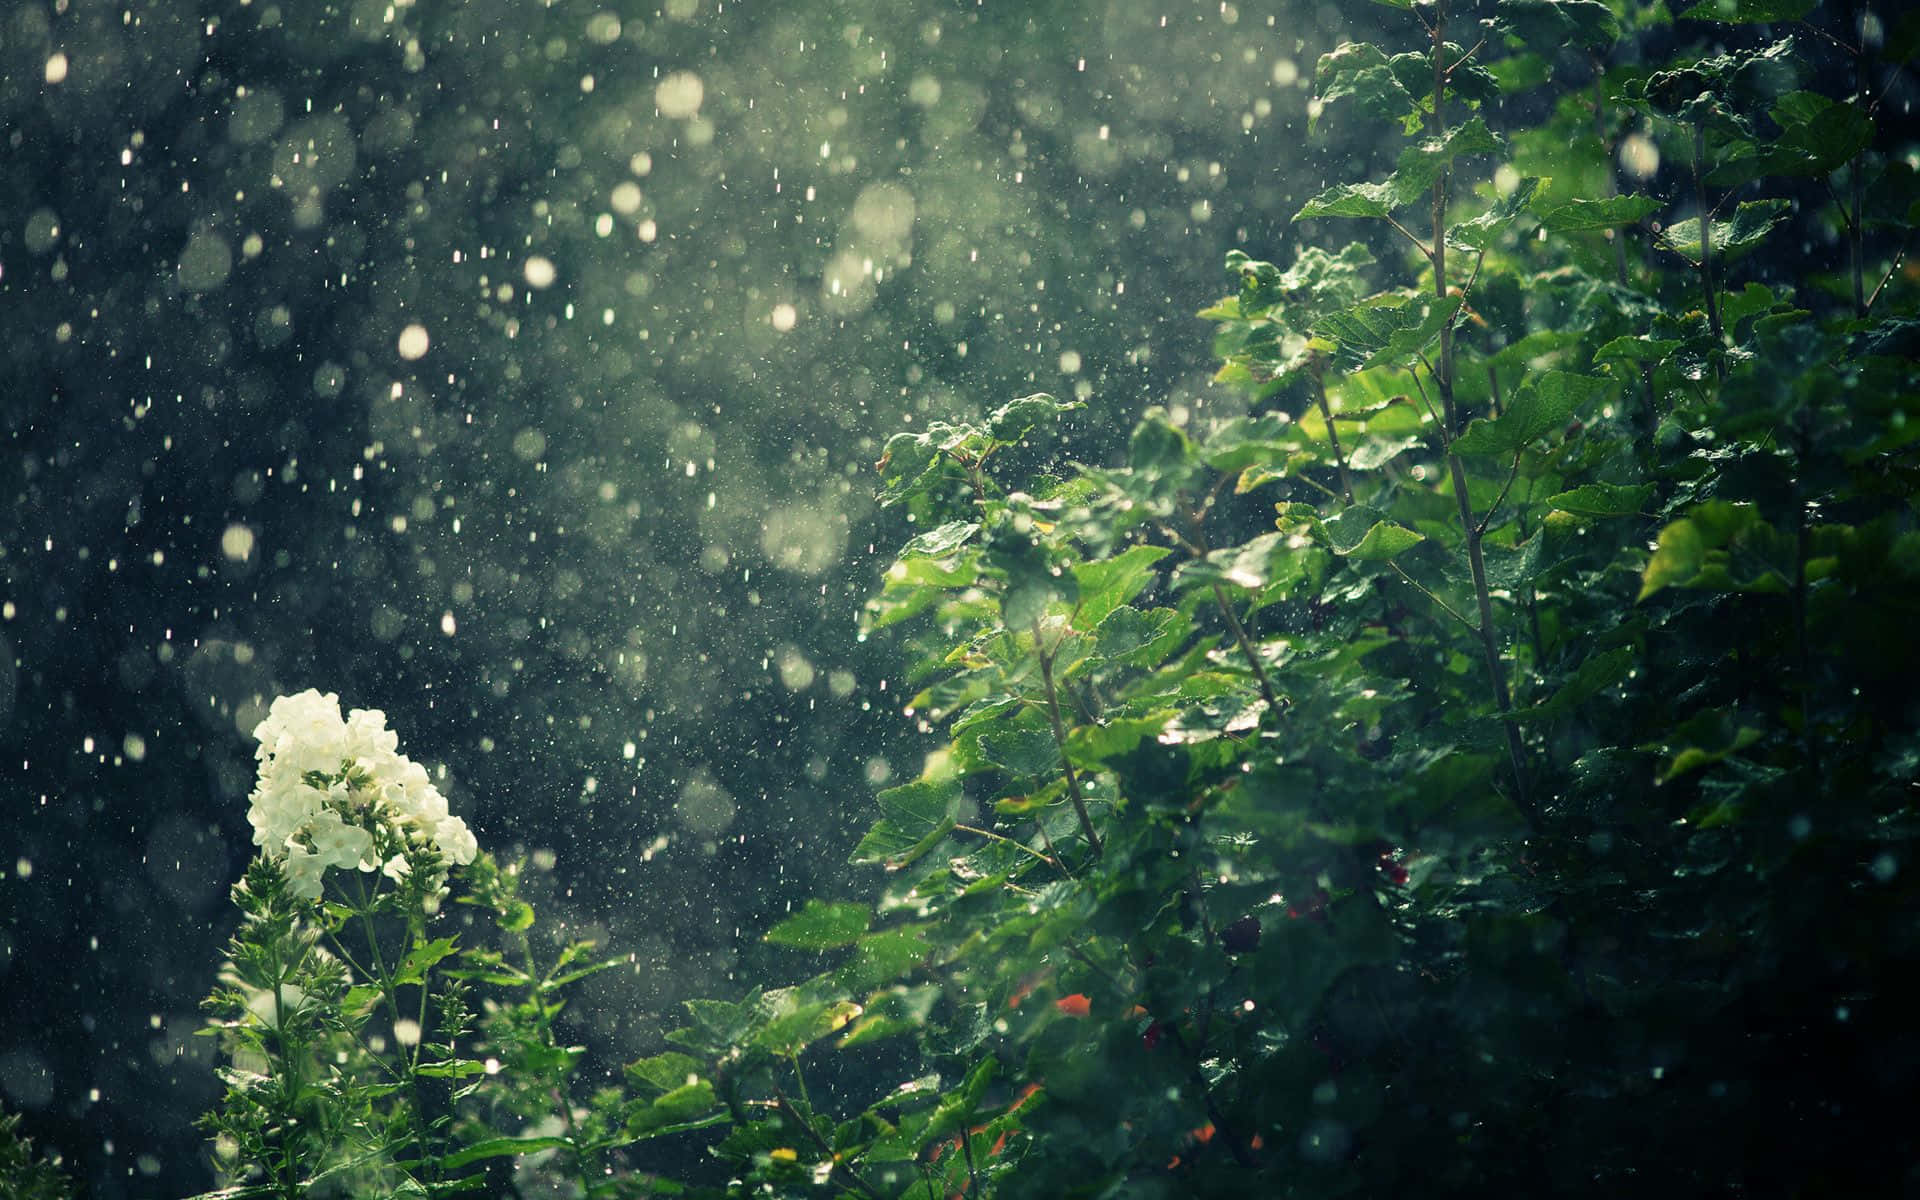 Caption: A Peaceful Spring Rain in a Lush Green Forest Wallpaper